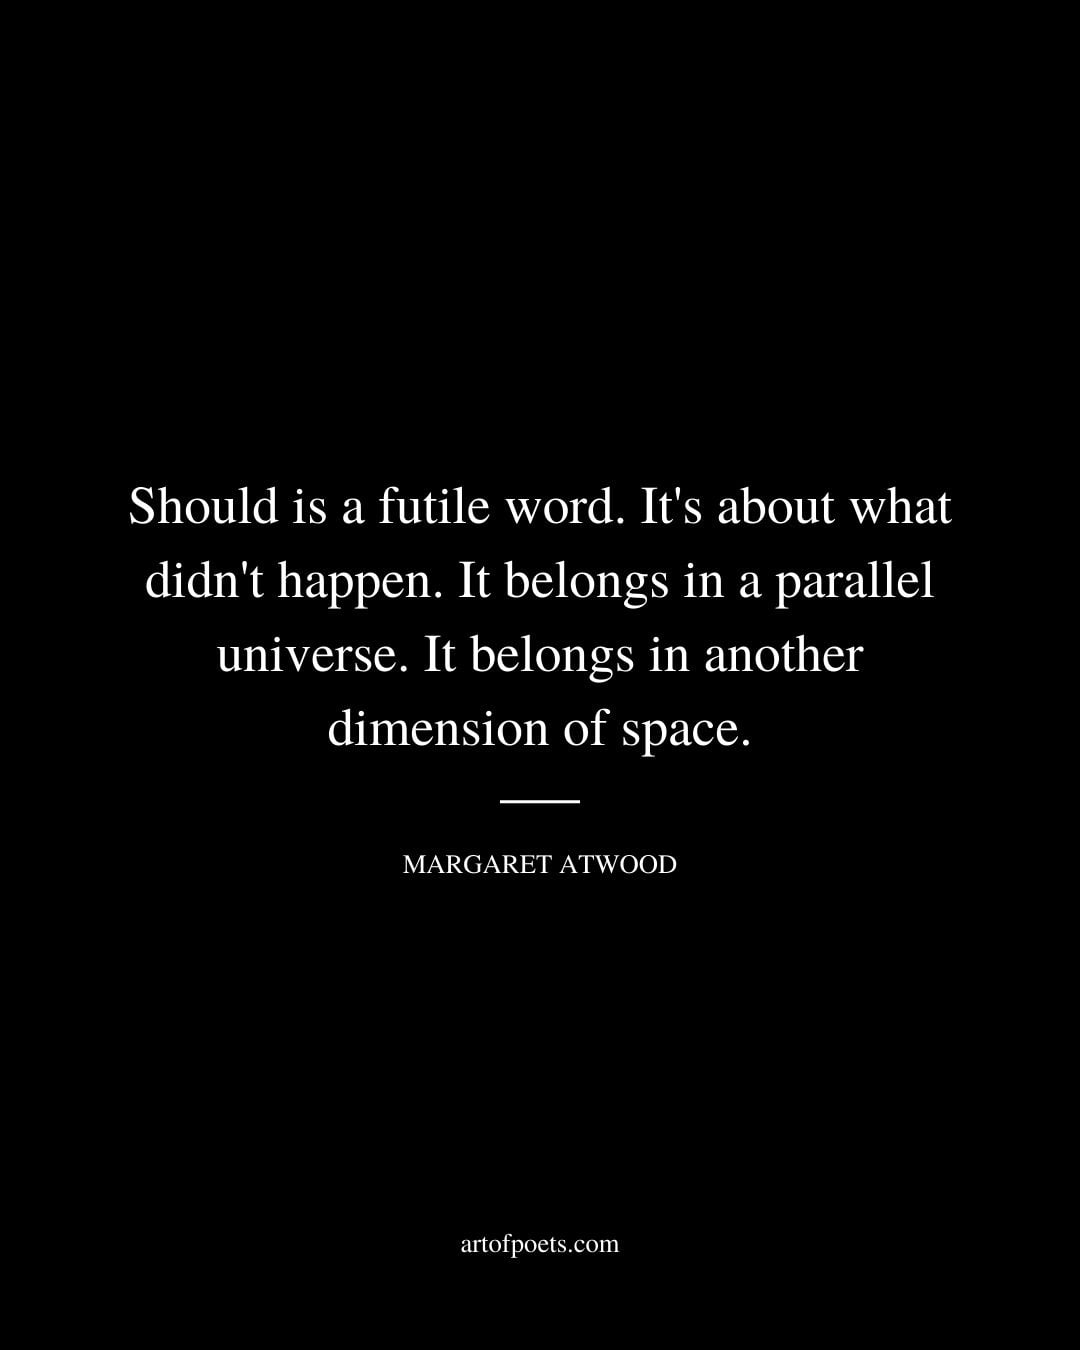 Should is a futile word. Its about what didnt happen. It belongs in a parallel universe. It belongs in another dimension of space. Margaret Atwood